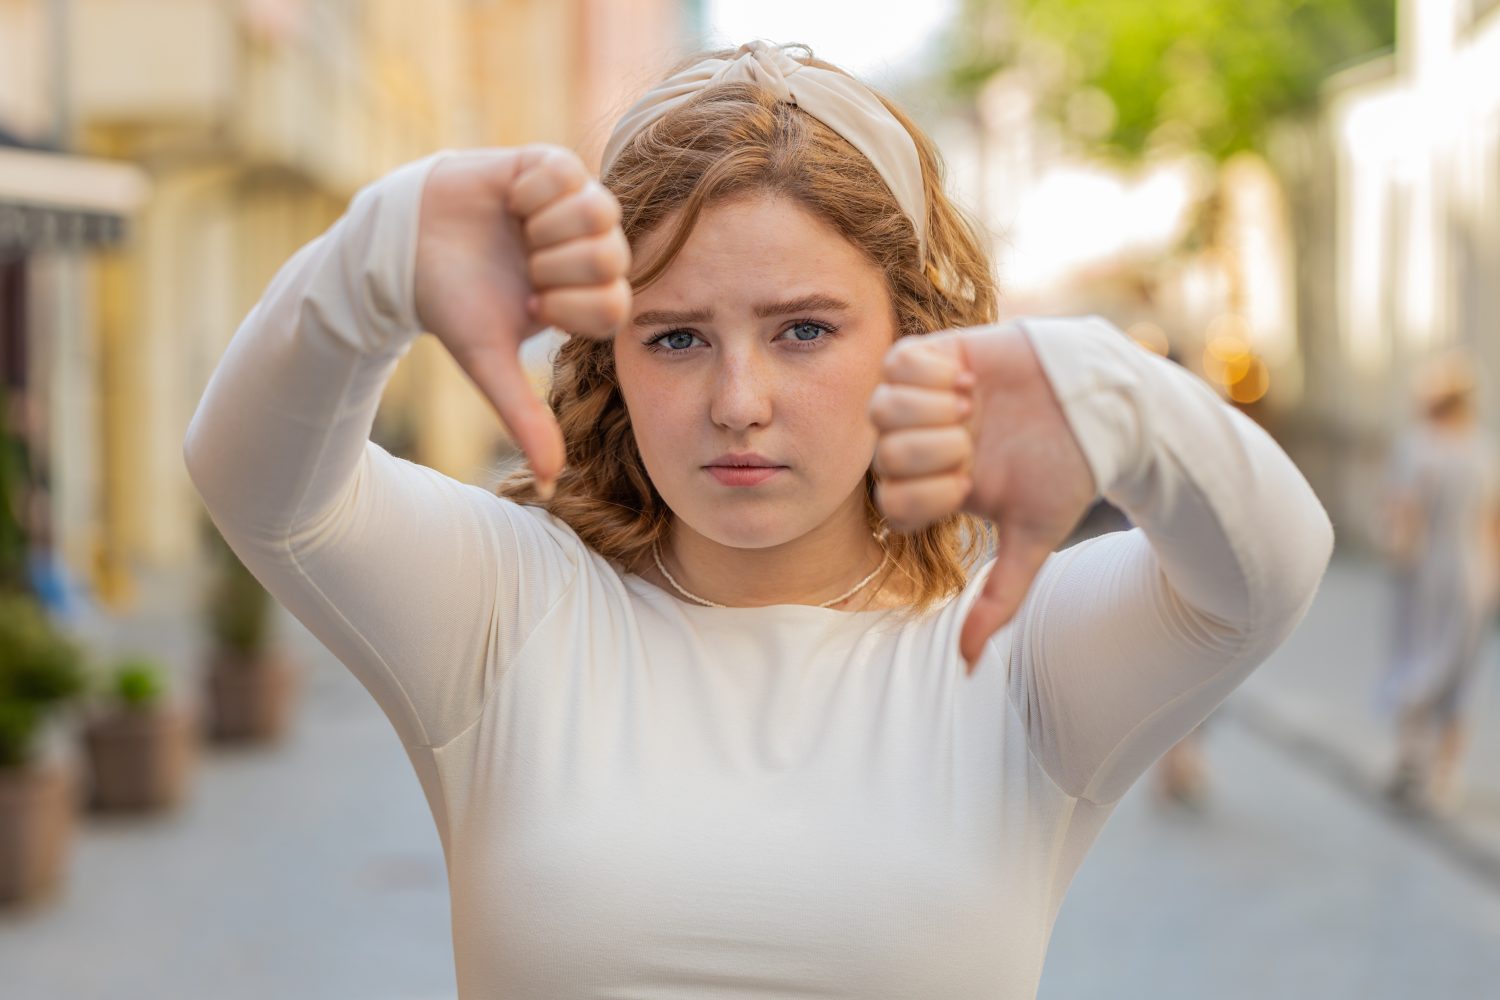 Dislike. Upset redhead young woman showing thumbs down sign gesture, expressing discontent, disapproval, dissatisfied bad work, mistake outdoors. Displeased girl in urban city street. Town lifestyles.